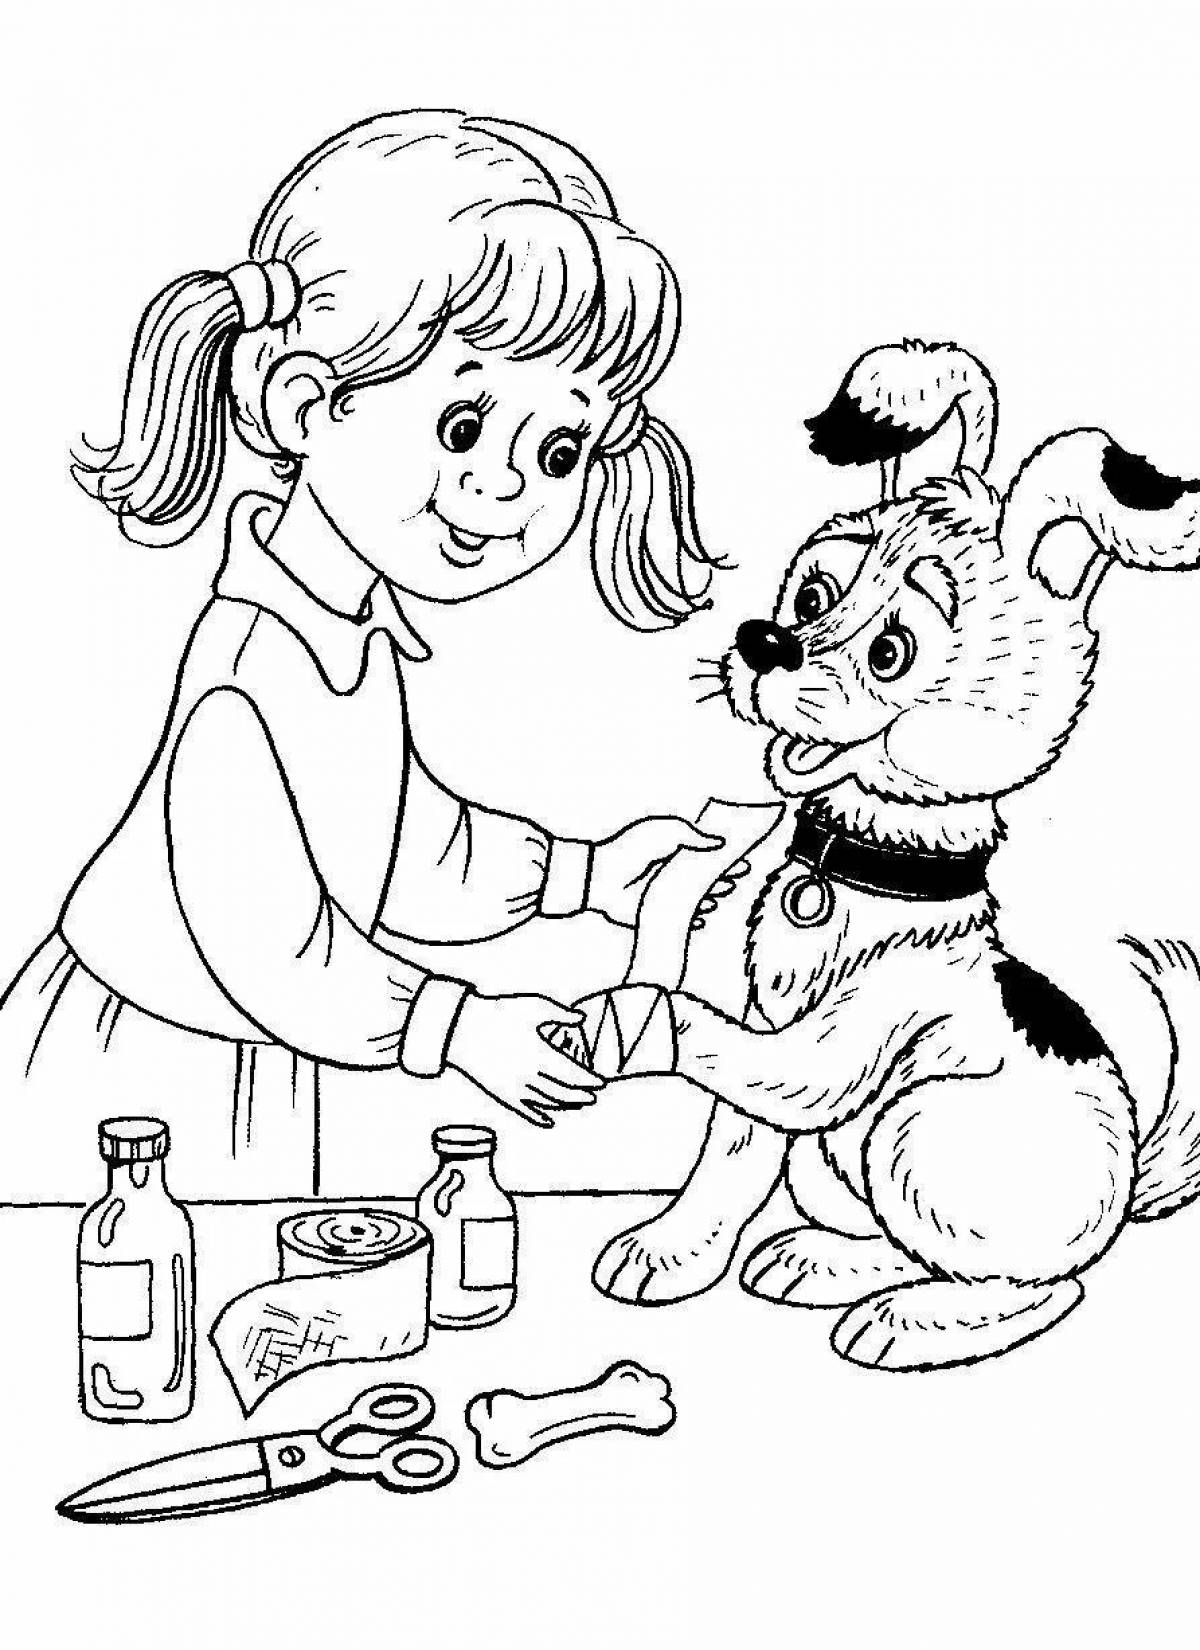 Coloring page wise care